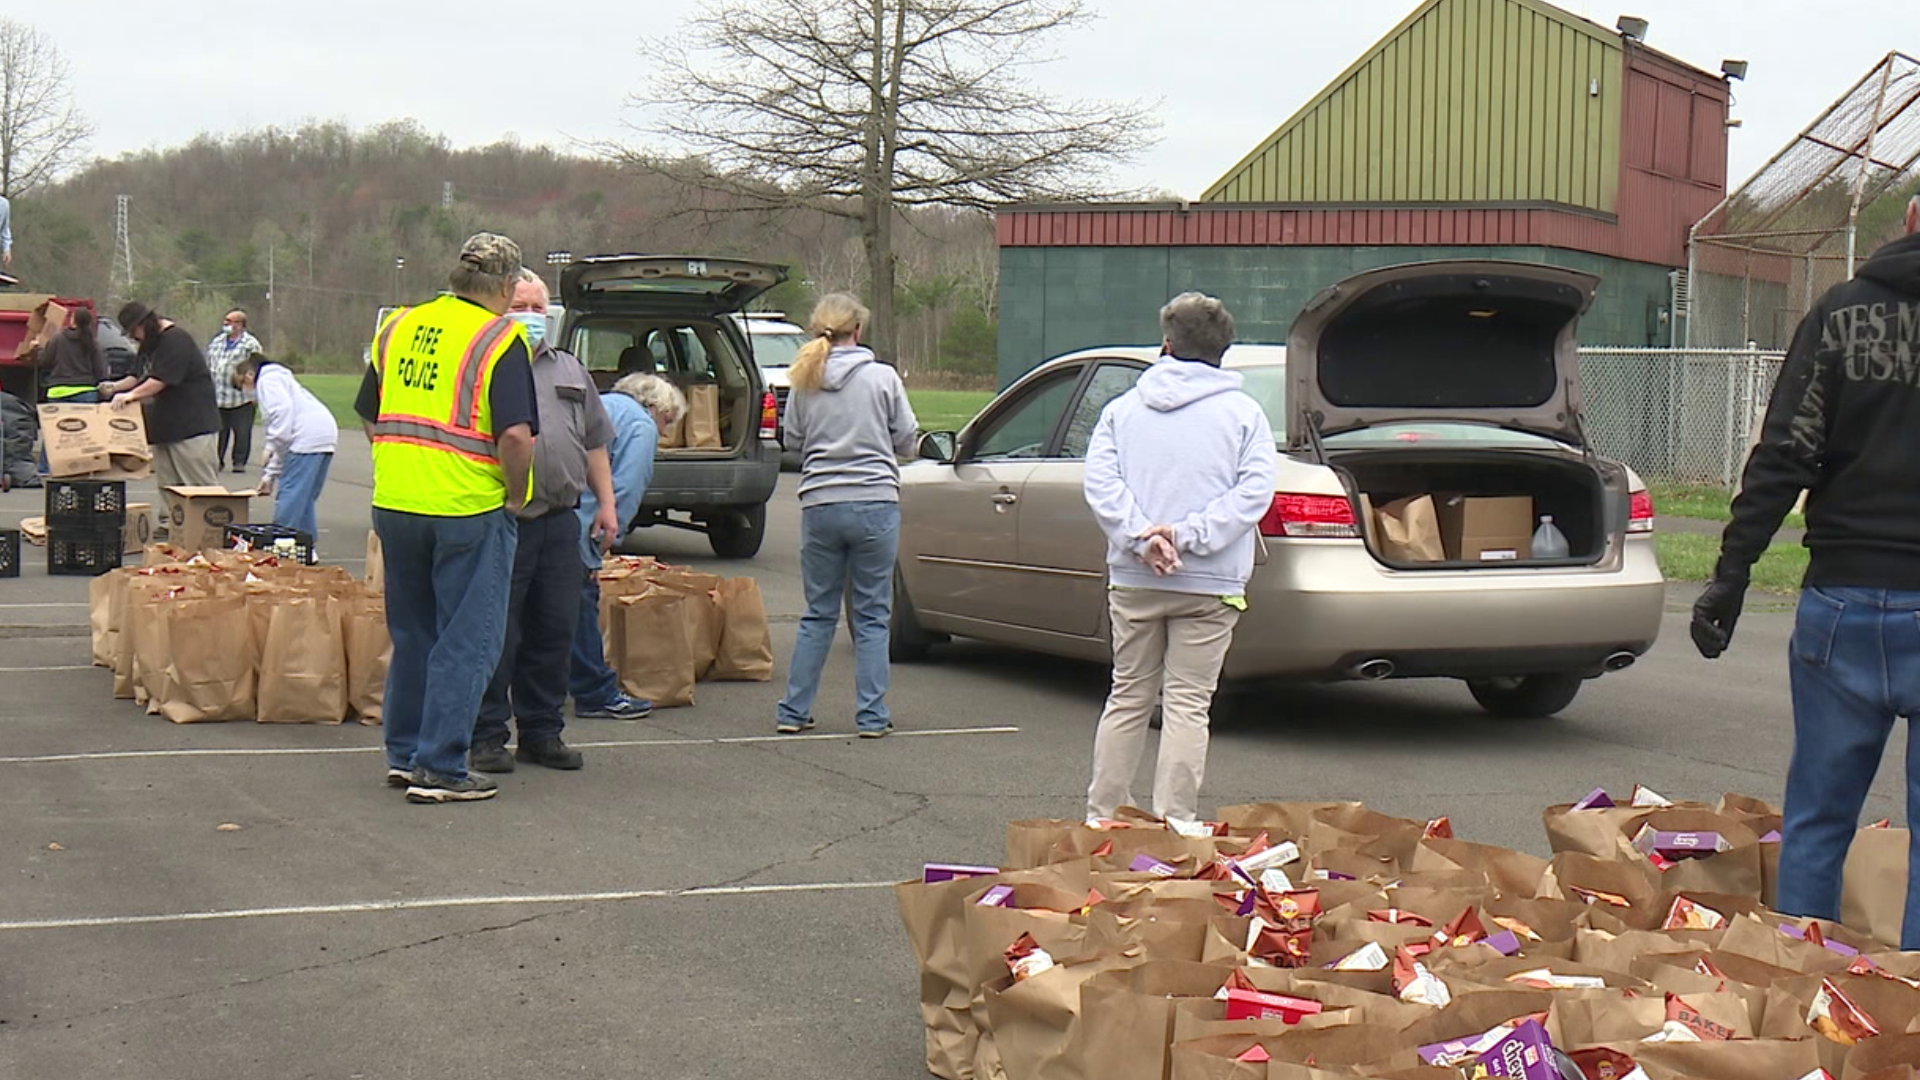 Organizers prepared 130 bags of food for families.